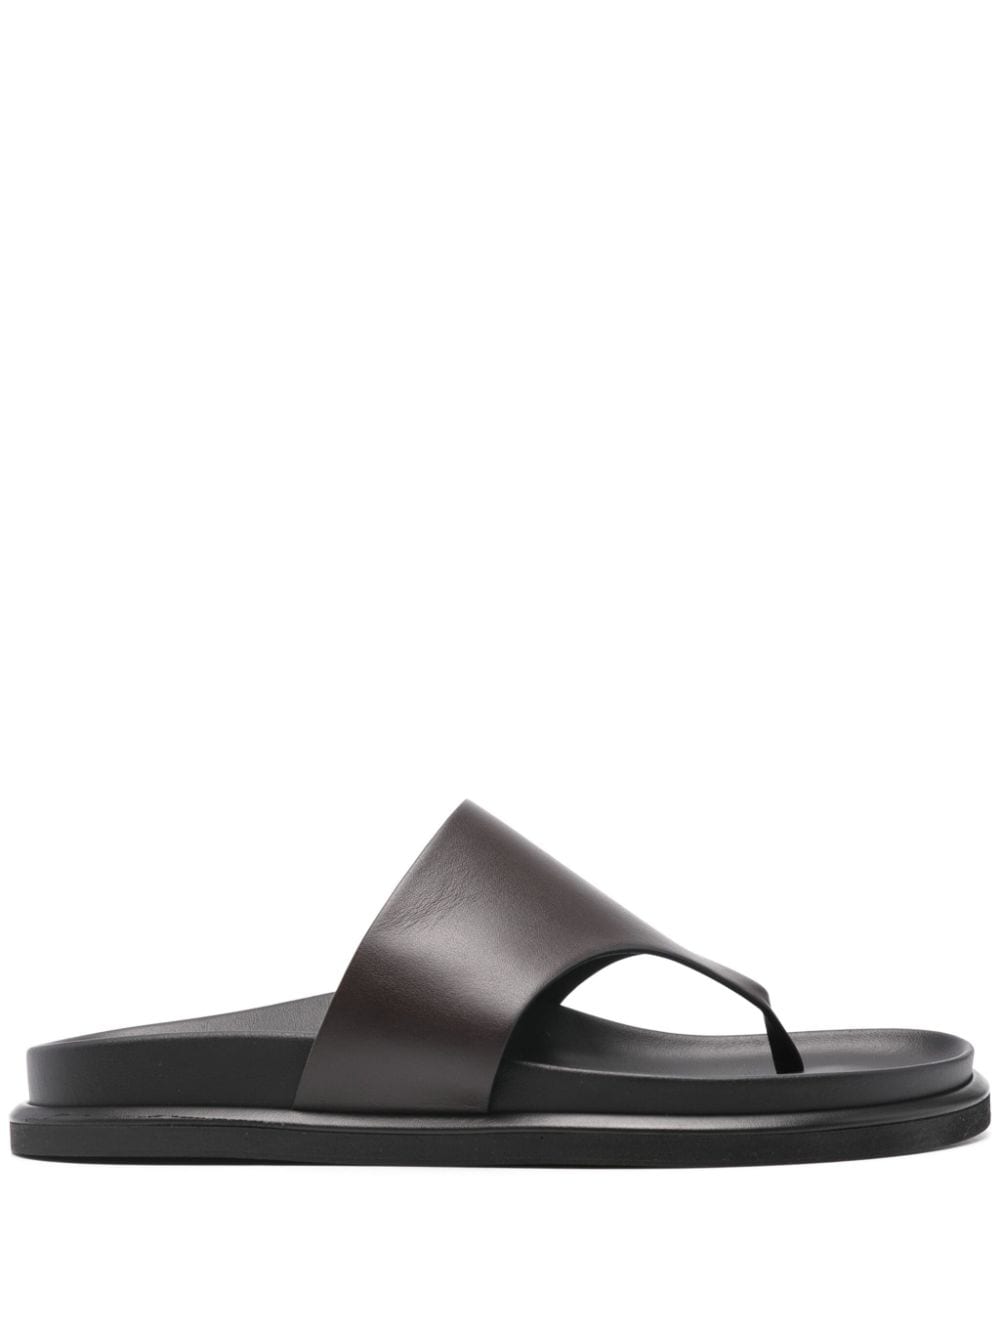 P.A.R.O.S.H. leather slip-on sandals - Marrone